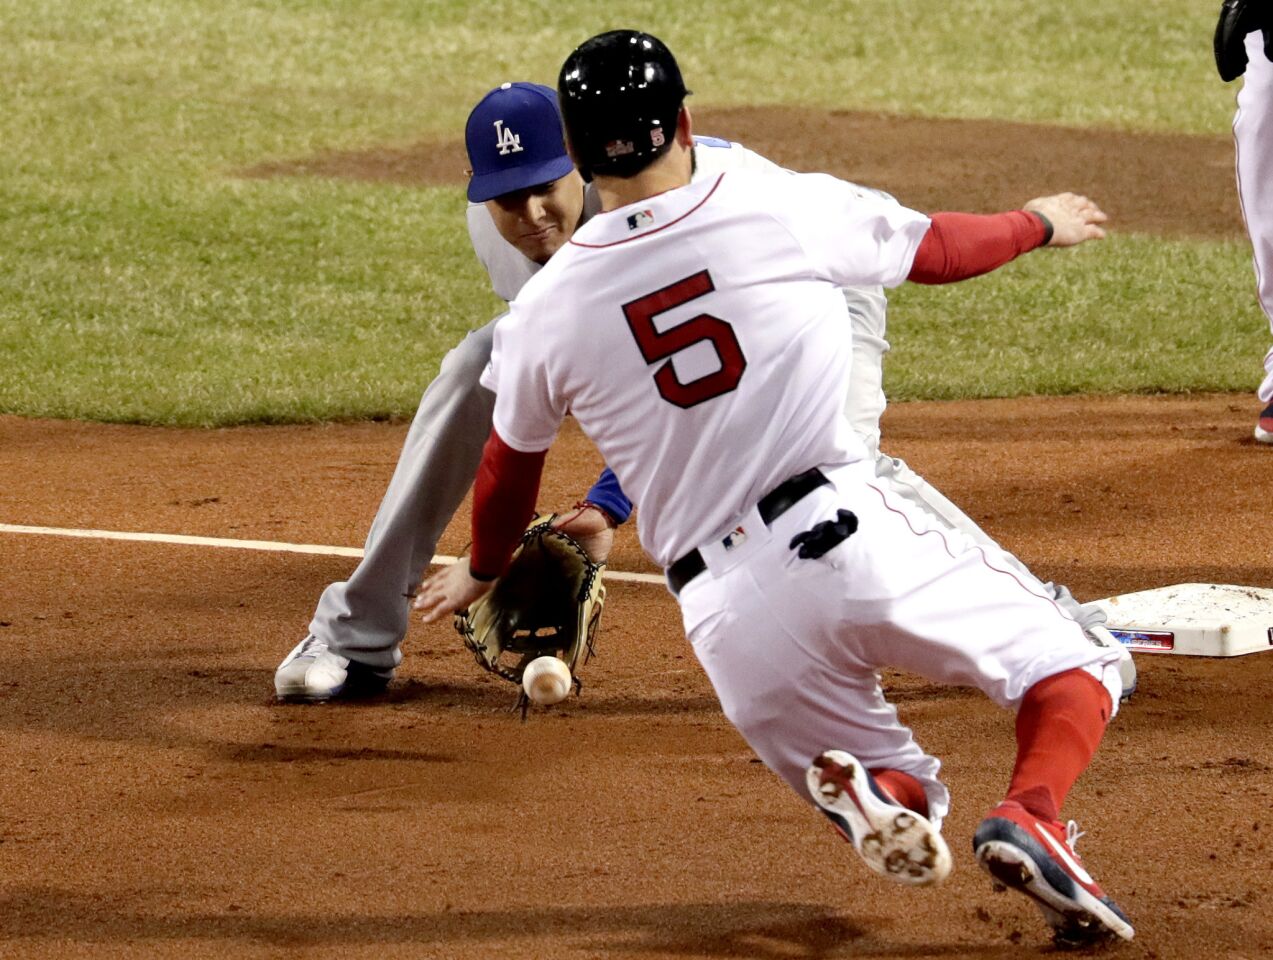 Dodgers' Manny Machado gets the ball ahead of Red Sox Ian Kinsler to tag him out at third base.